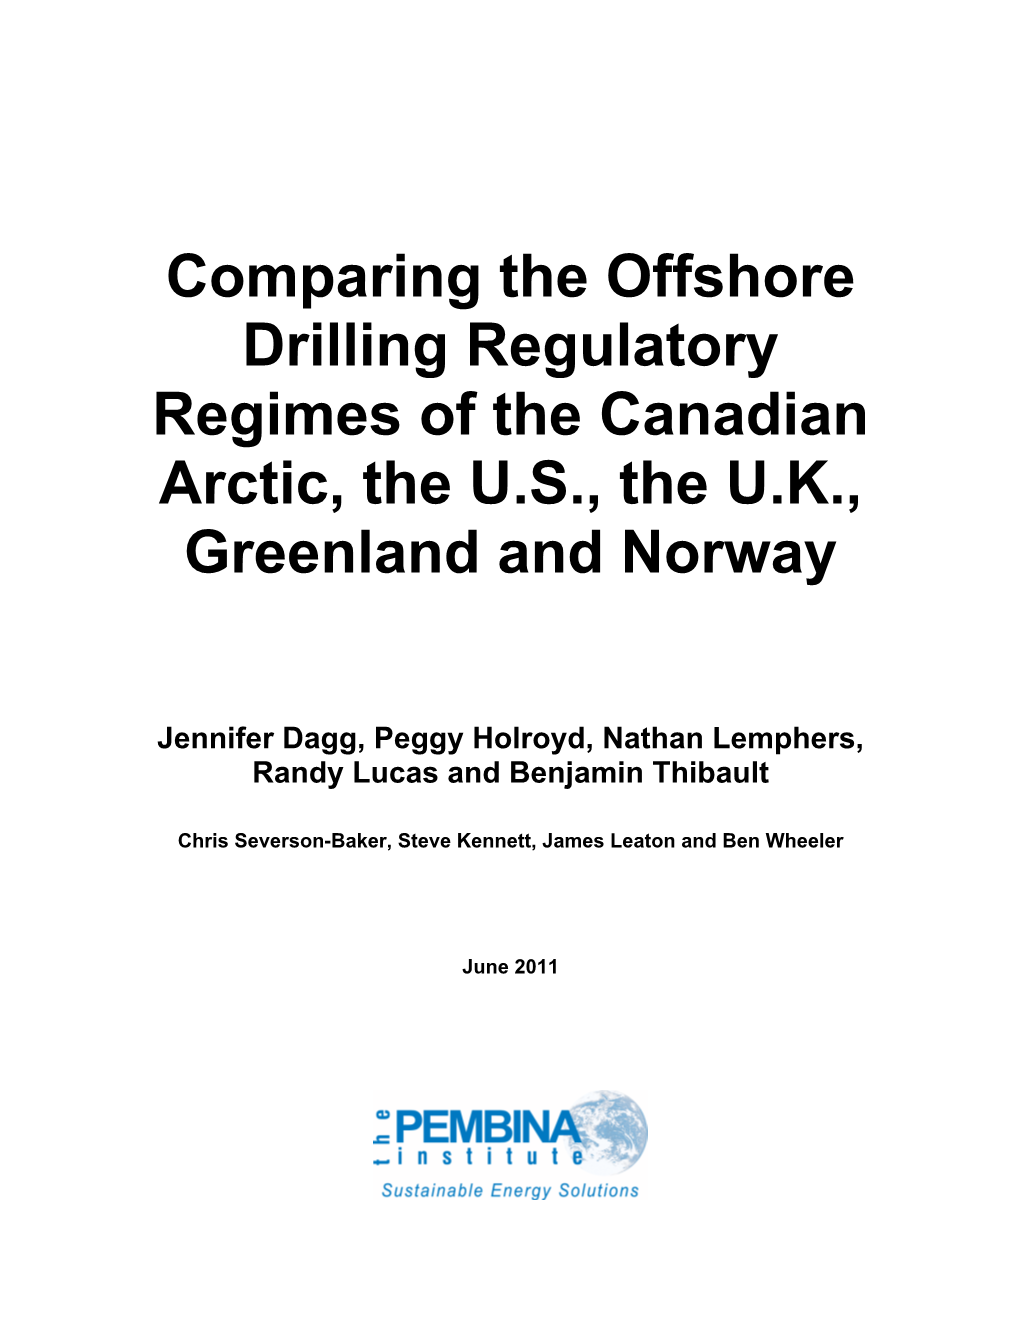 Comparing the Offshore Drilling Regulatory Regimes of the Canadian Arctic, the U.S., the U.K., Greenland and Norway